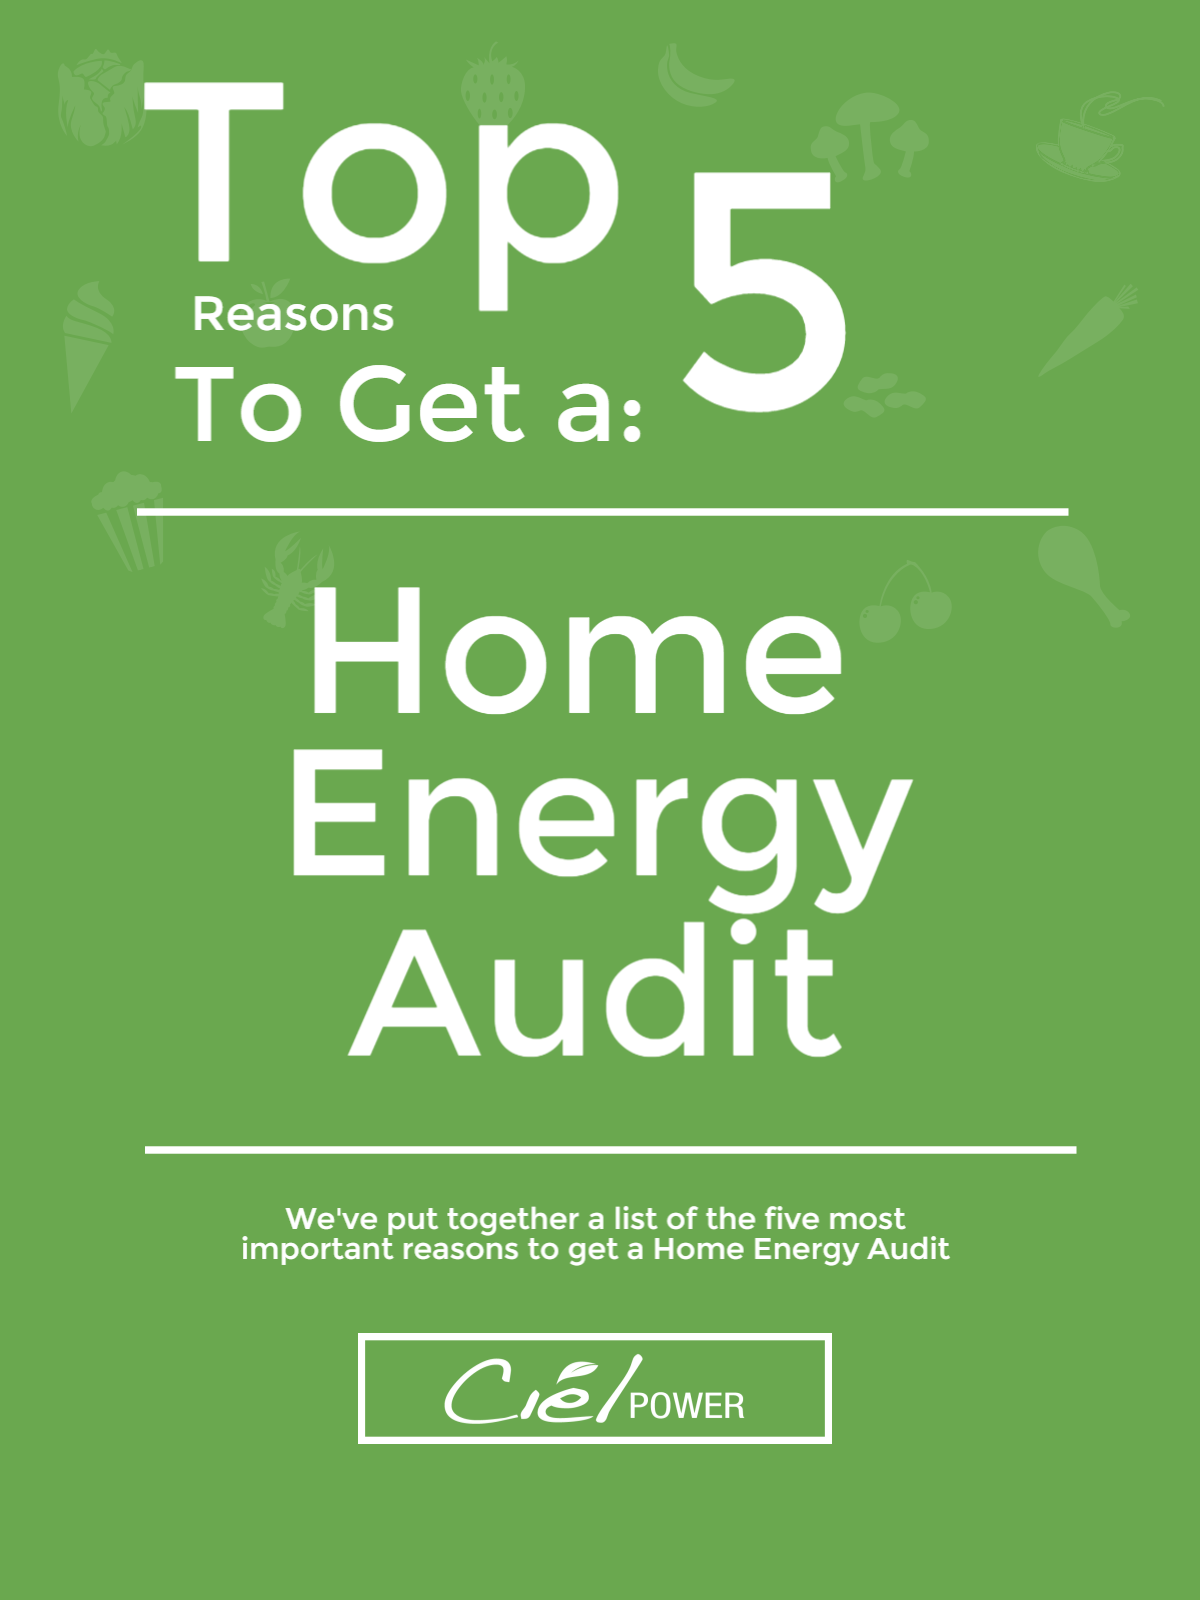 Top 5 Reasons to Get A Home Energy Audit